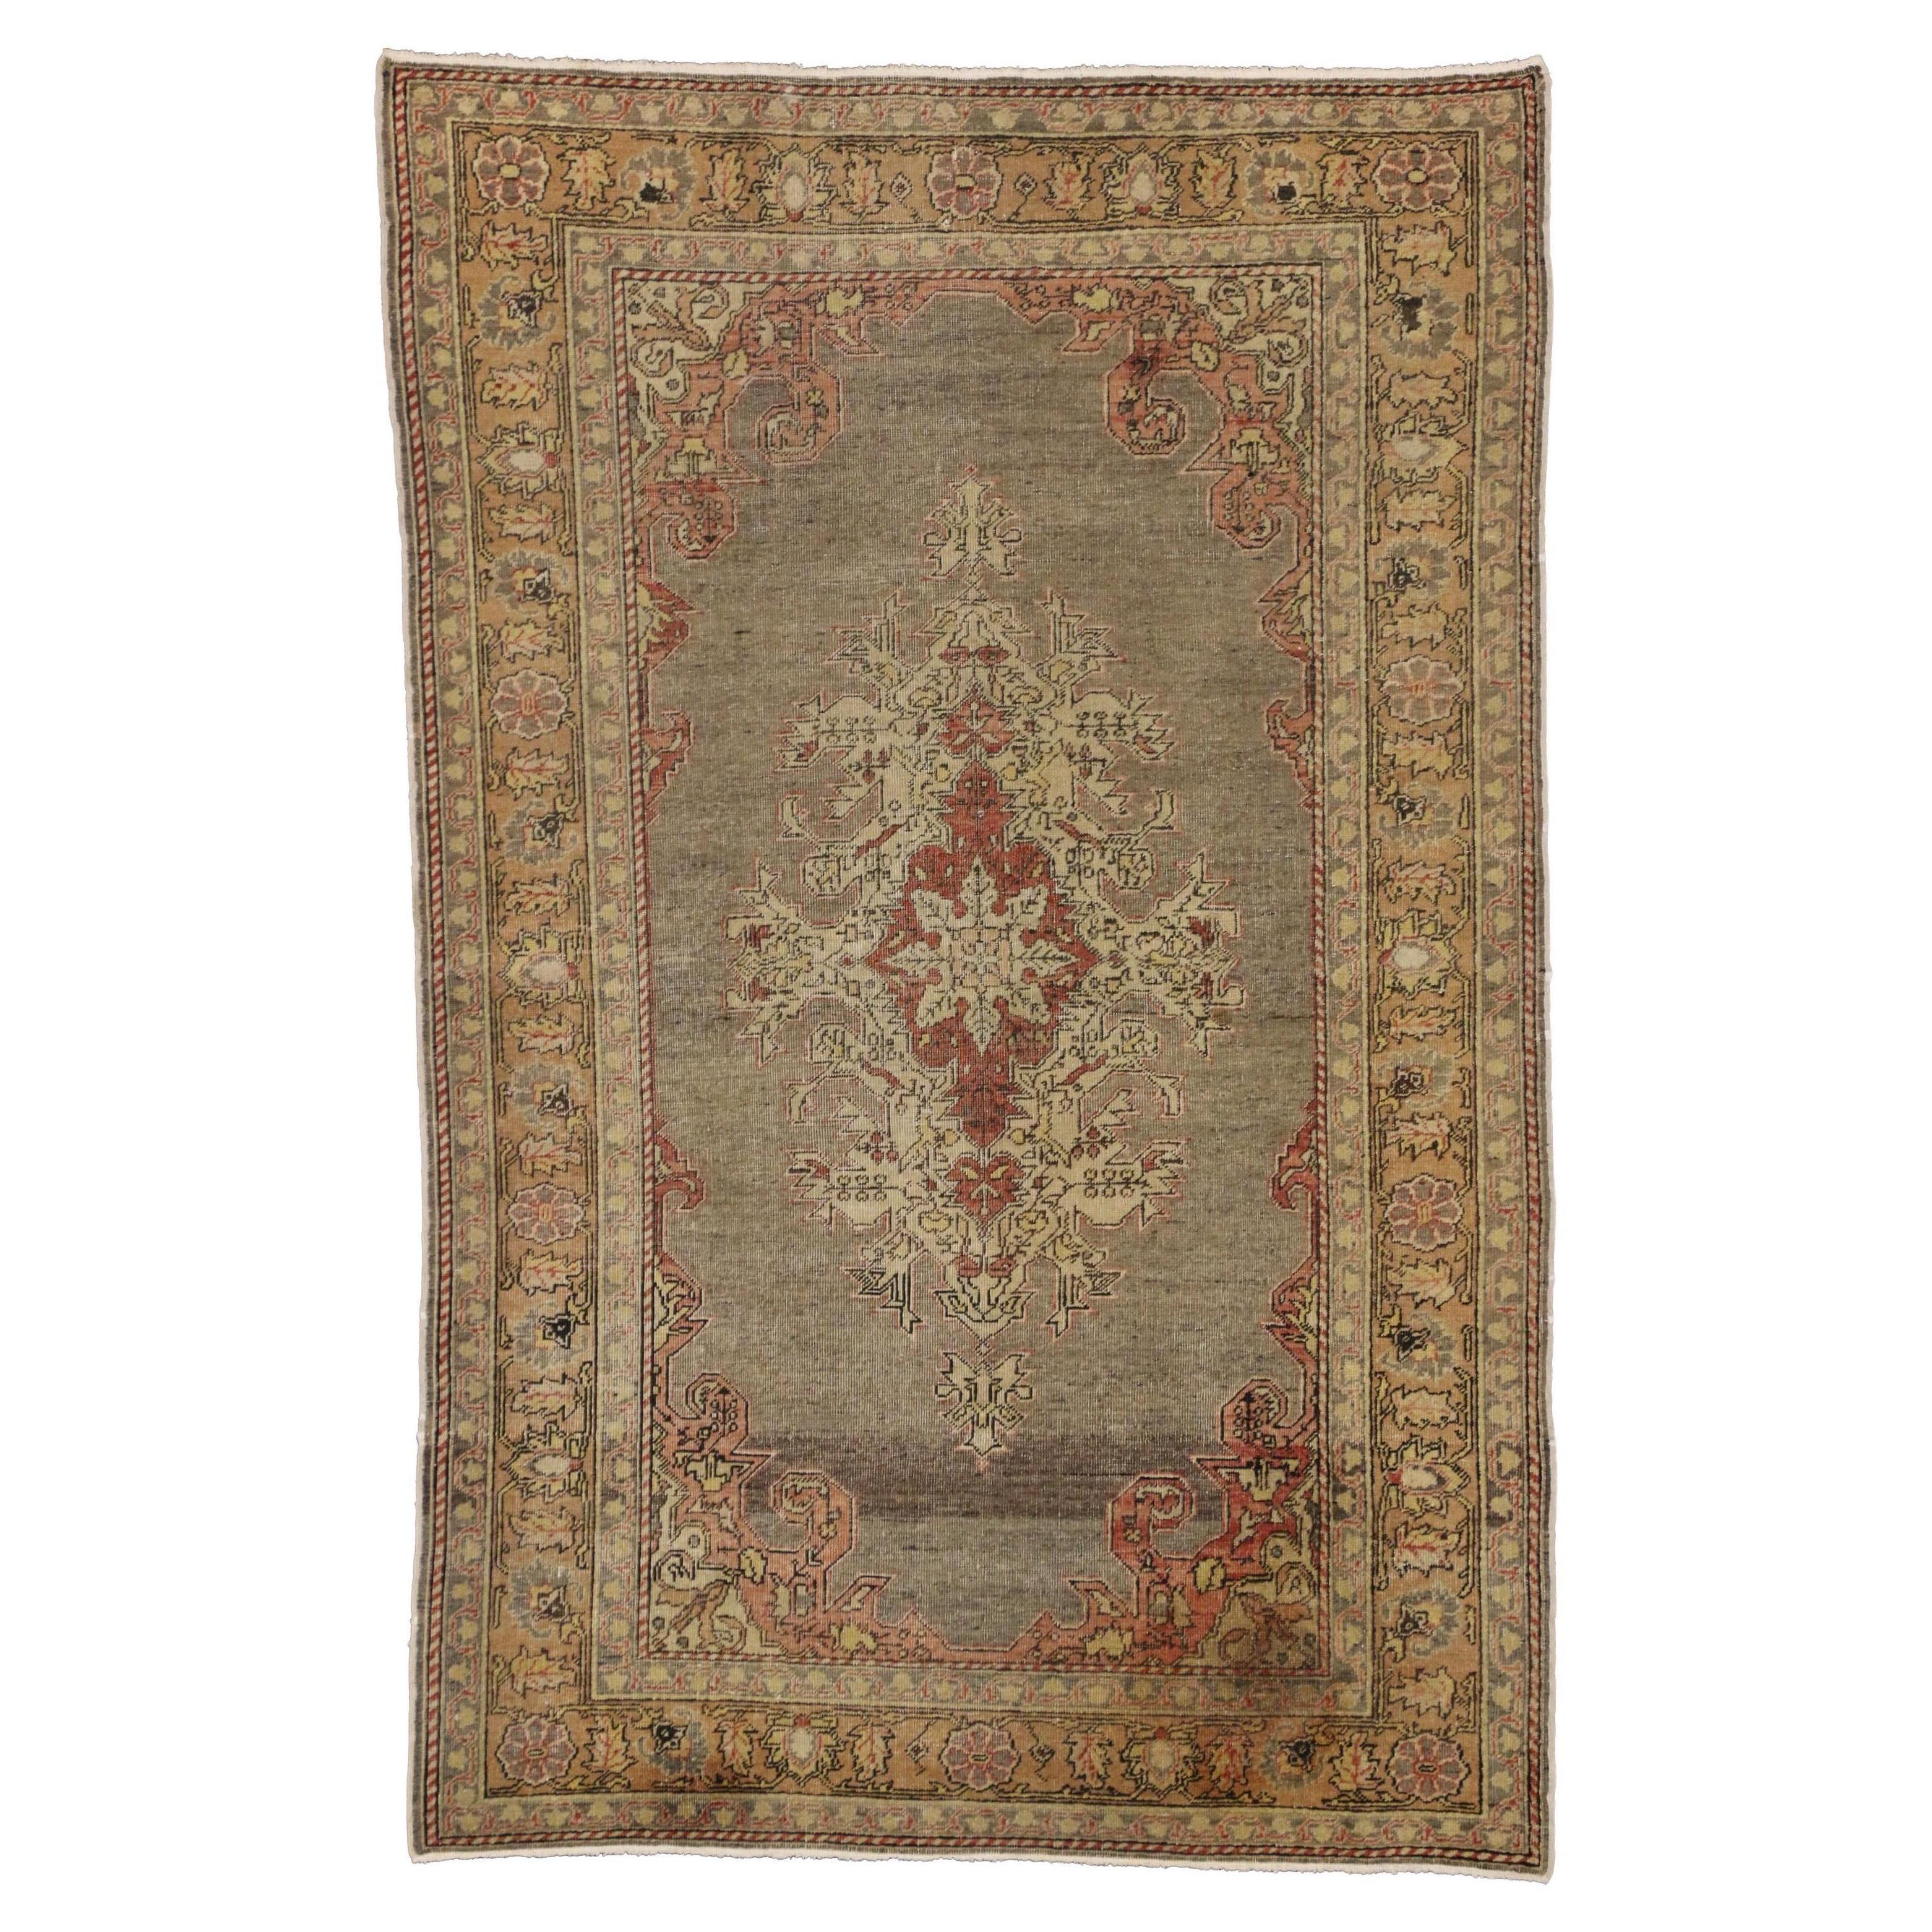 Distressed Antique Turkish Sivas Rug with Modern Rustic Style